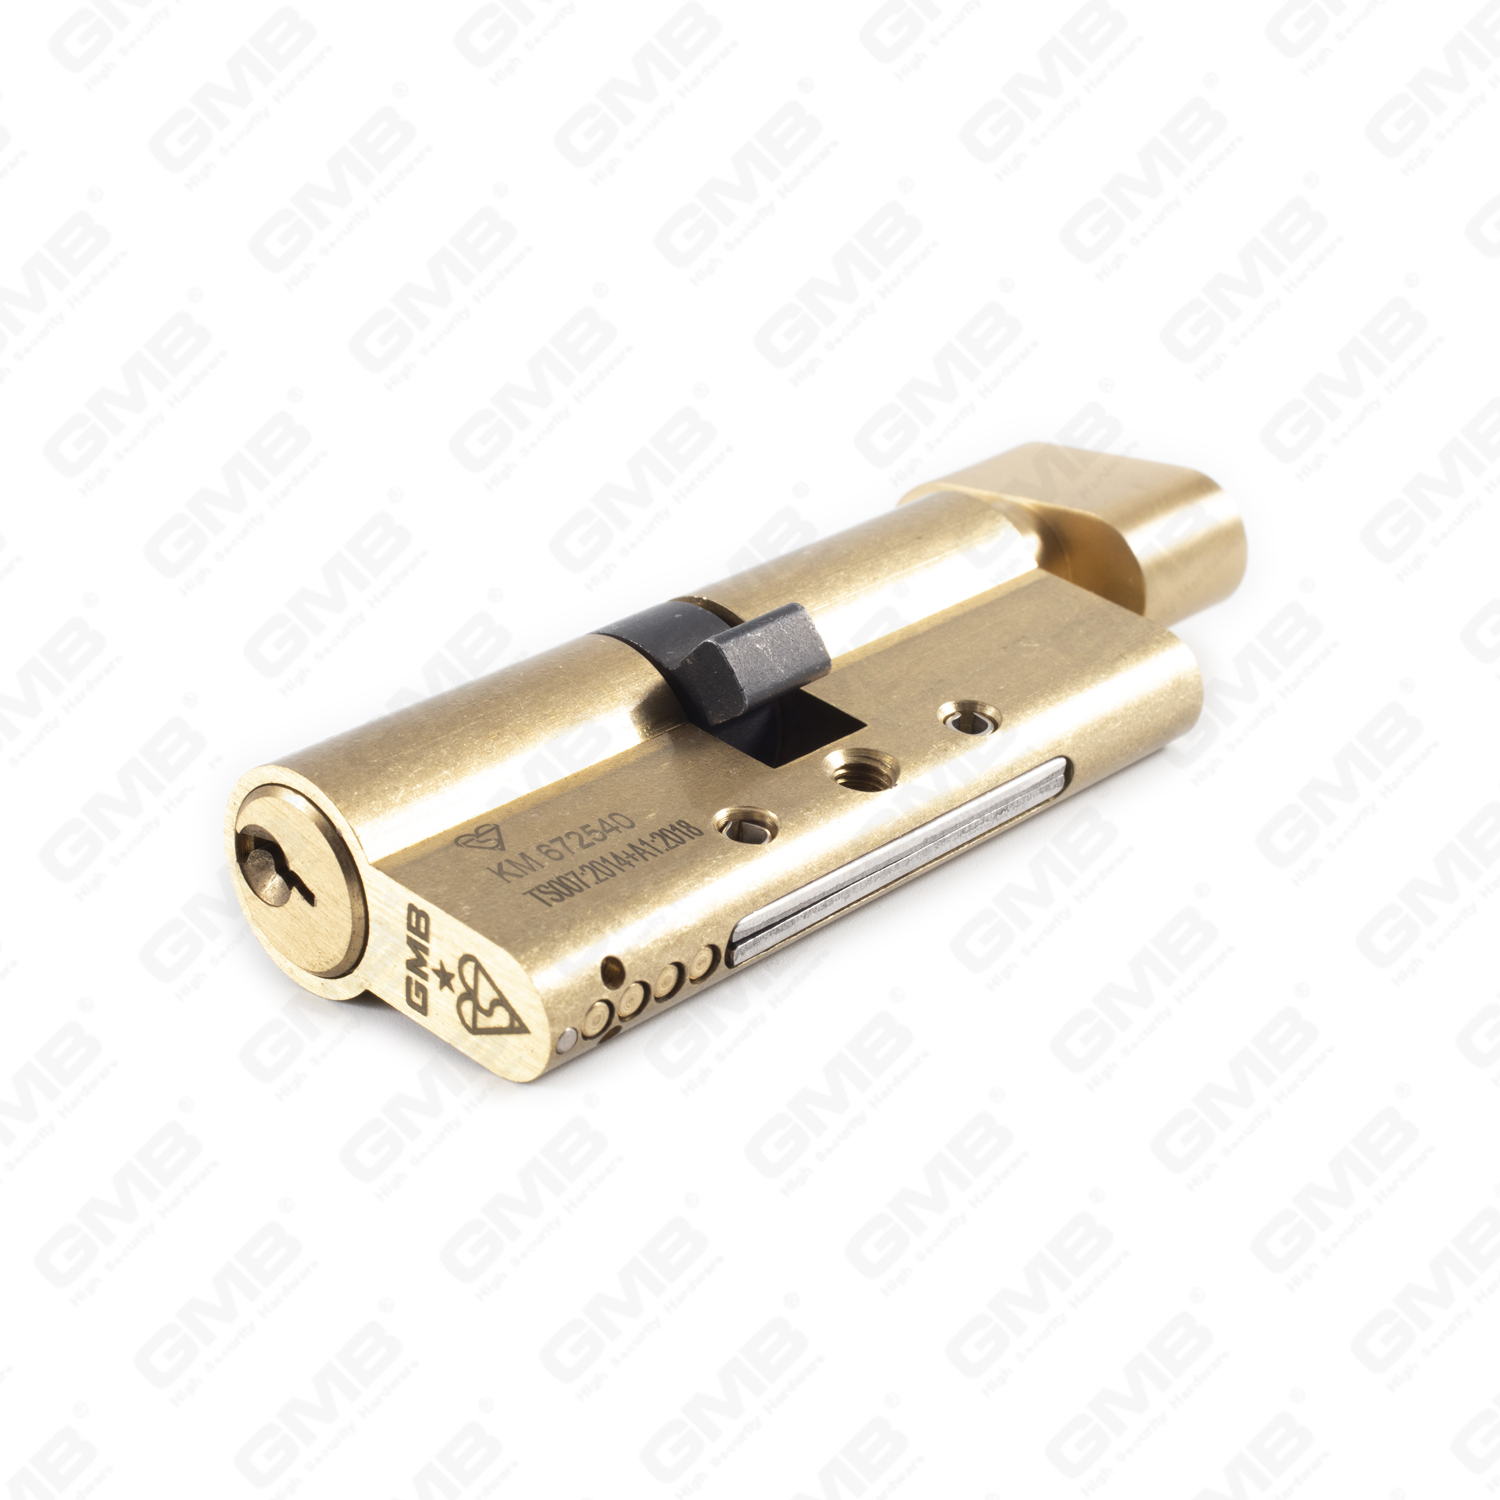 BSI KITEMARKED ONE STAR RATING Cylinder with Turn Knob